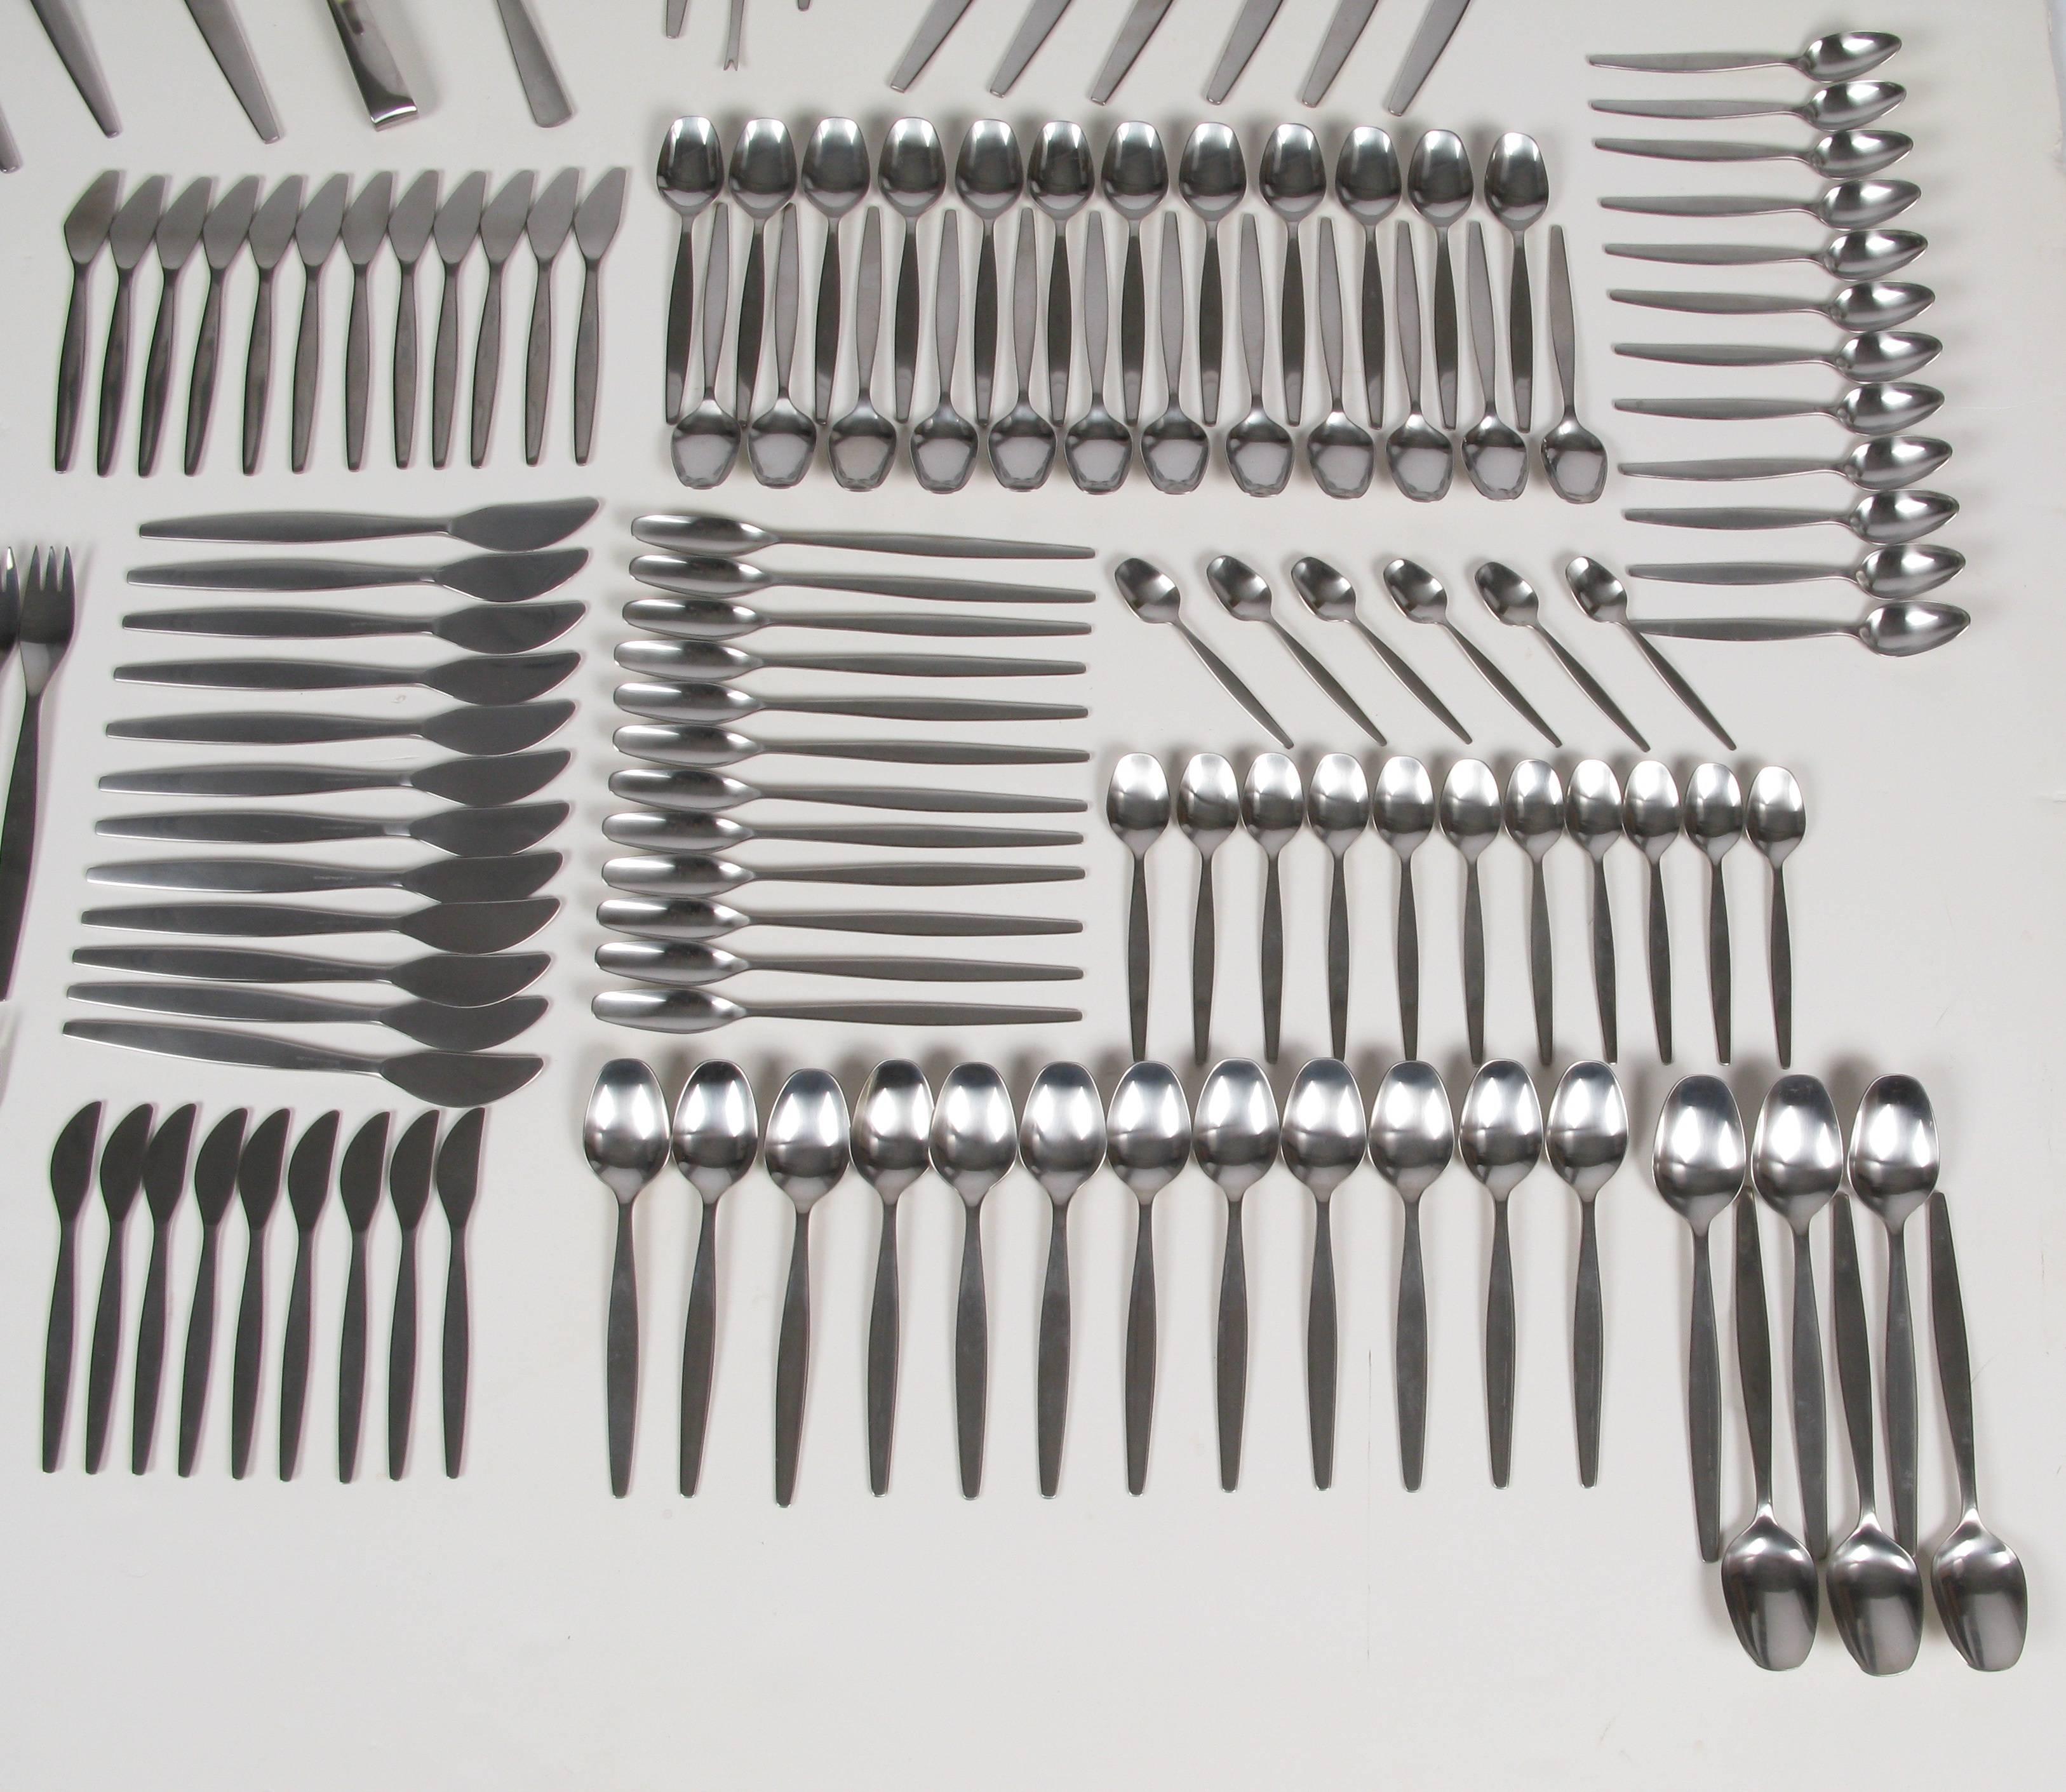 1960s monumental 166 piece stainless flatware set from Sweden by Gense. Most in unused condition. Includes two flatware chests.